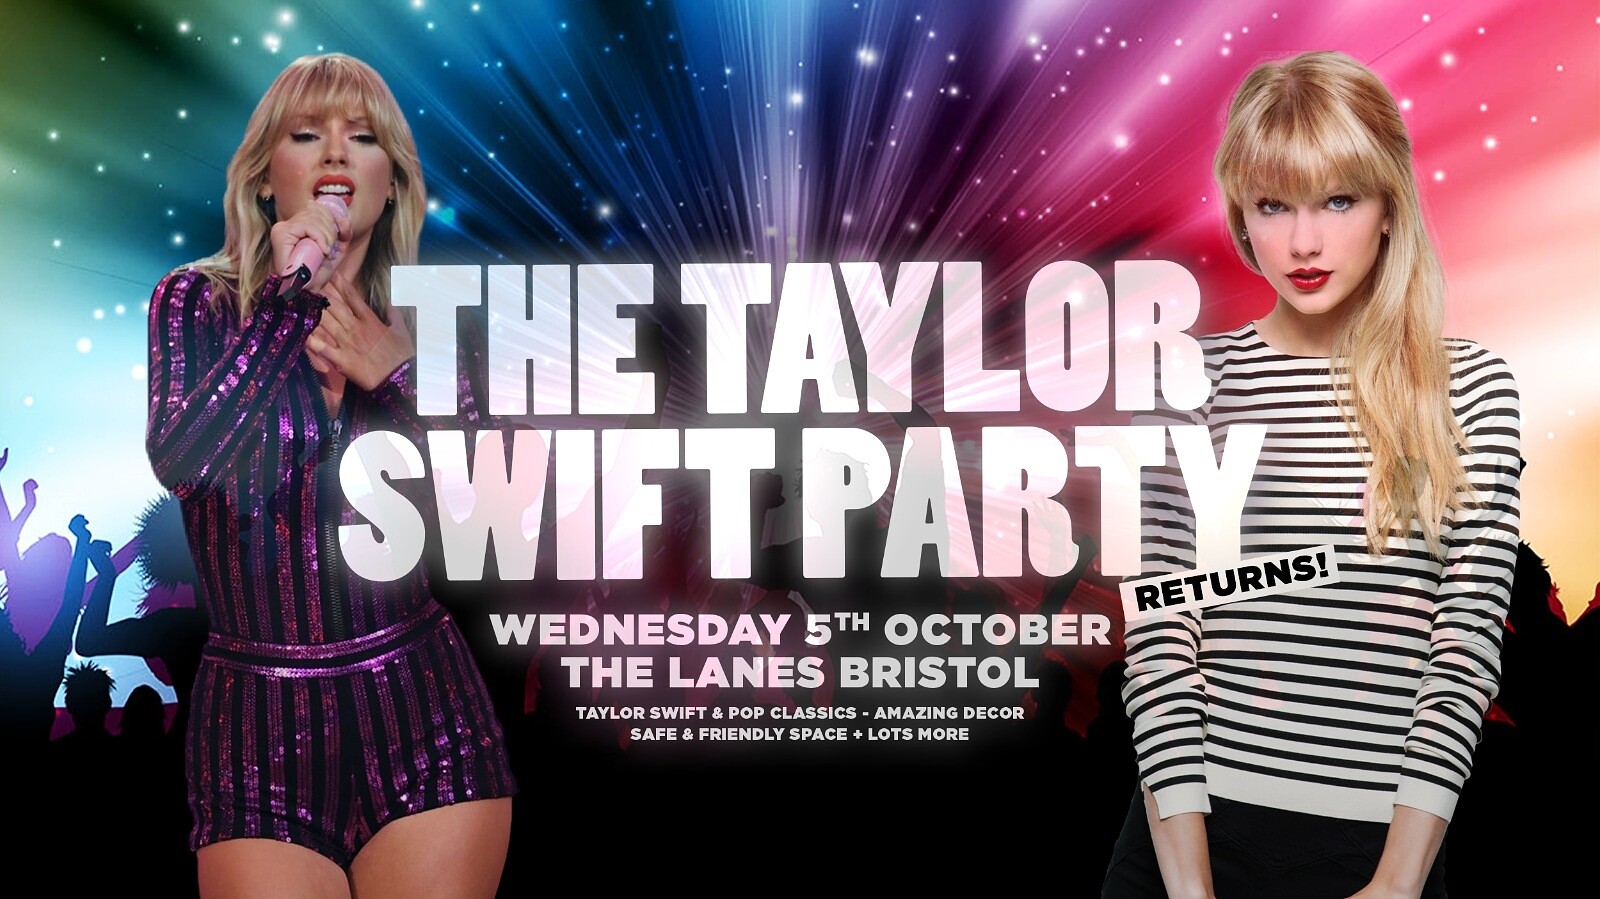 The Taylor Swift Party Returns at The Lanes